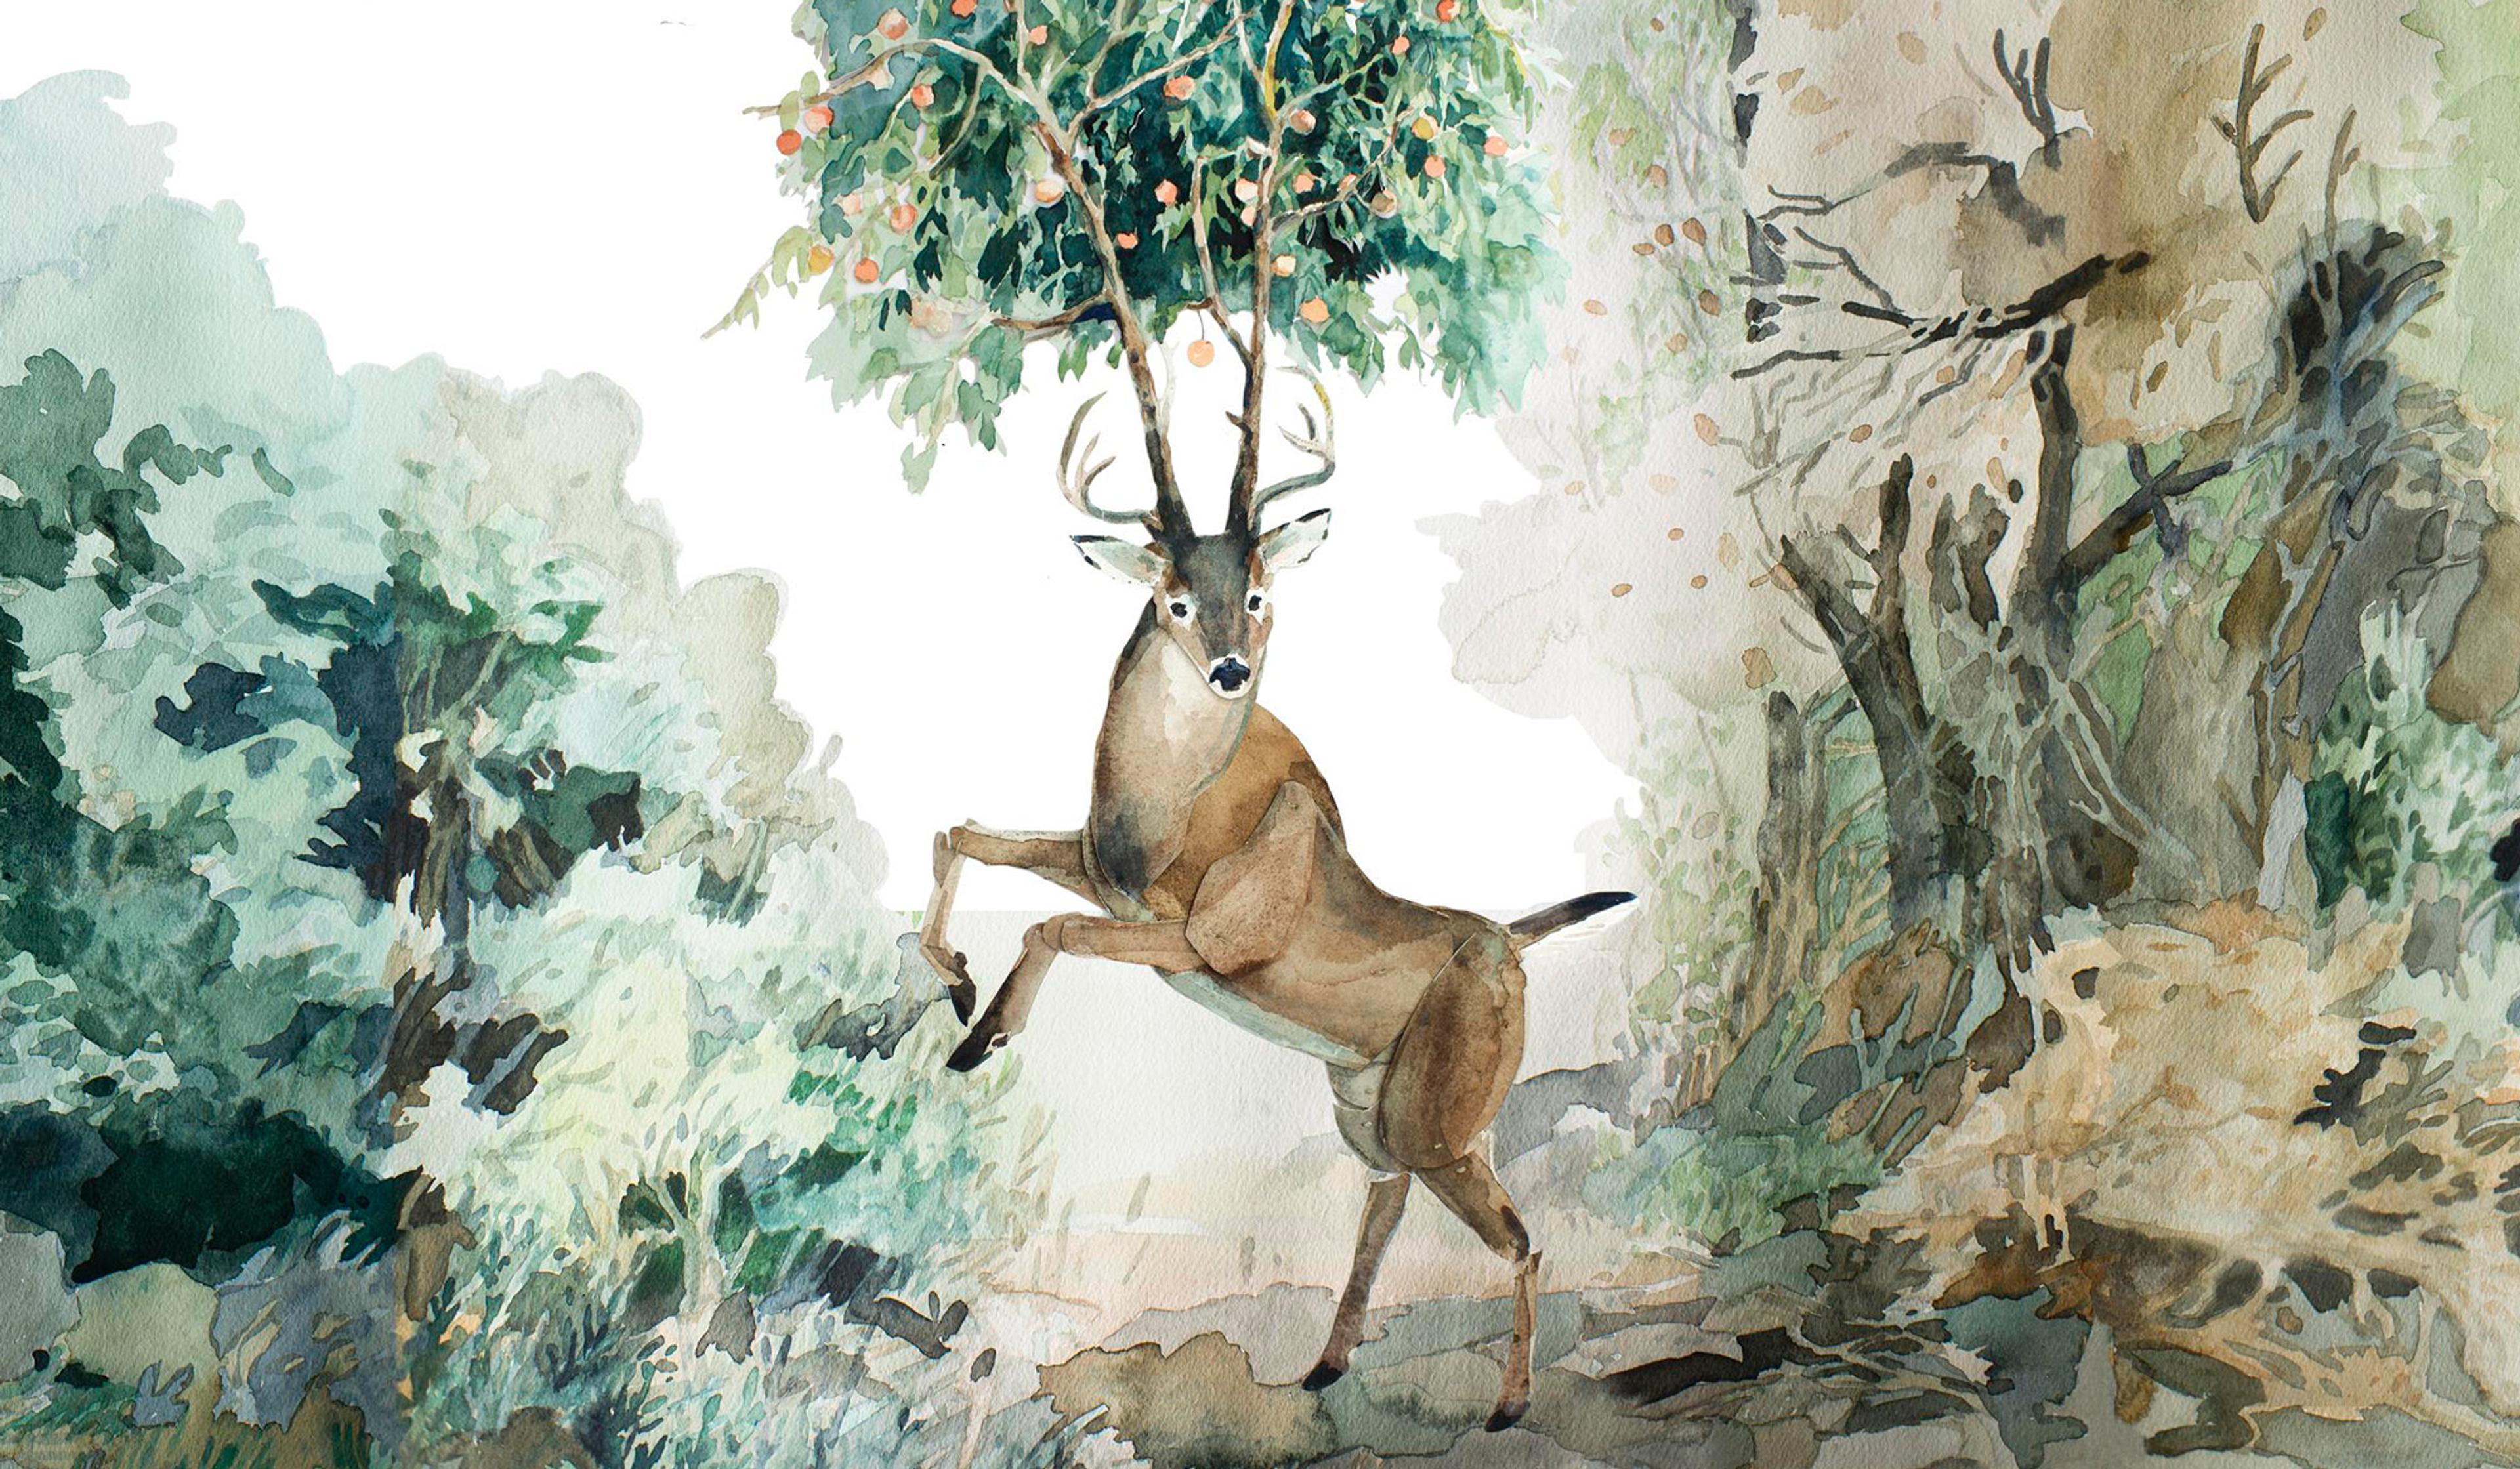 Watercolour painting of a deer with antlers incorporating tree branches and fruit, standing on its hind legs in a lush forest.